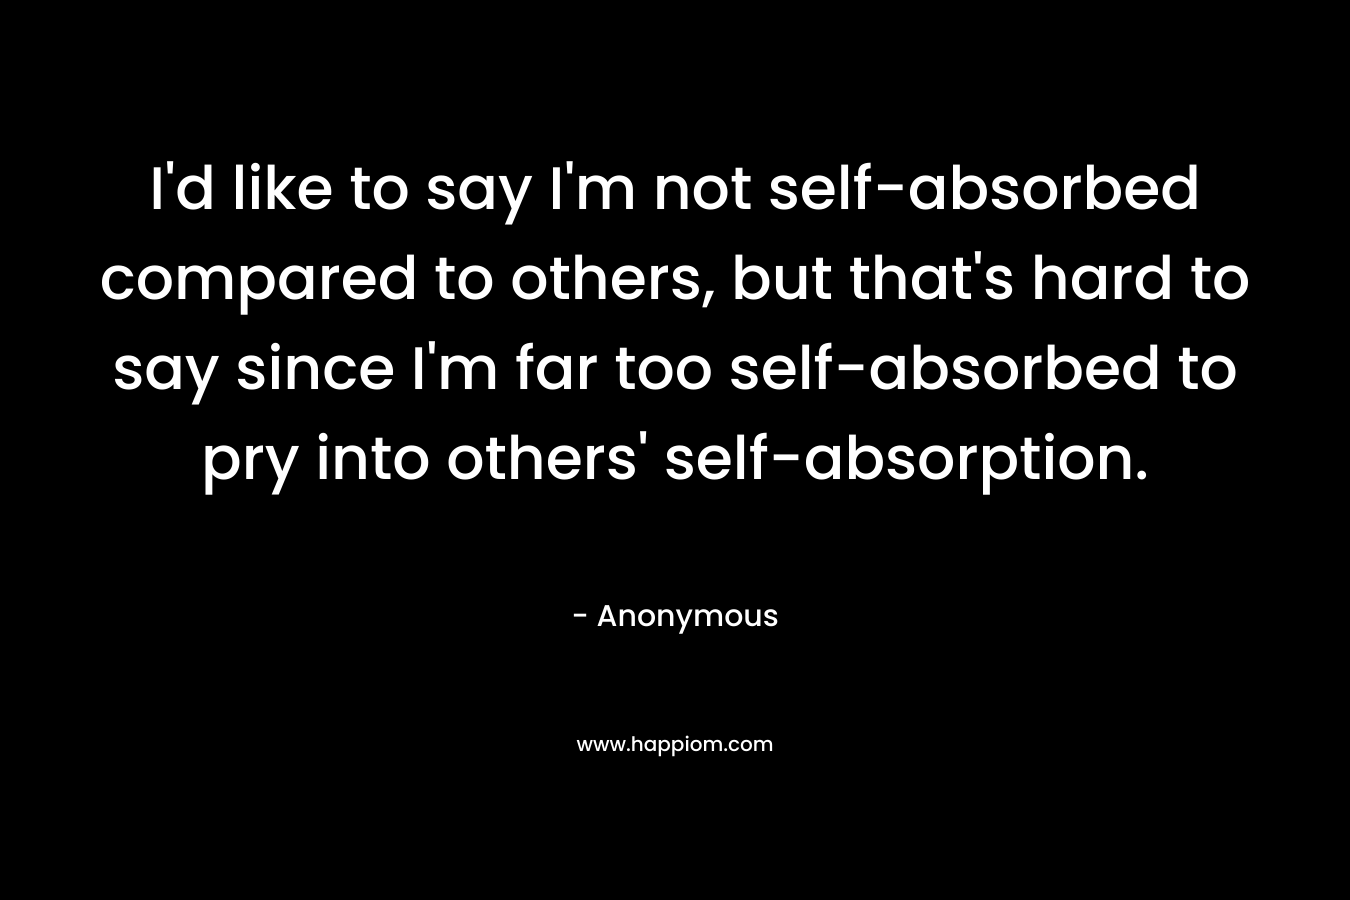 I'd like to say I'm not self-absorbed compared to others, but that's hard to say since I'm far too self-absorbed to pry into others' self-absorption.